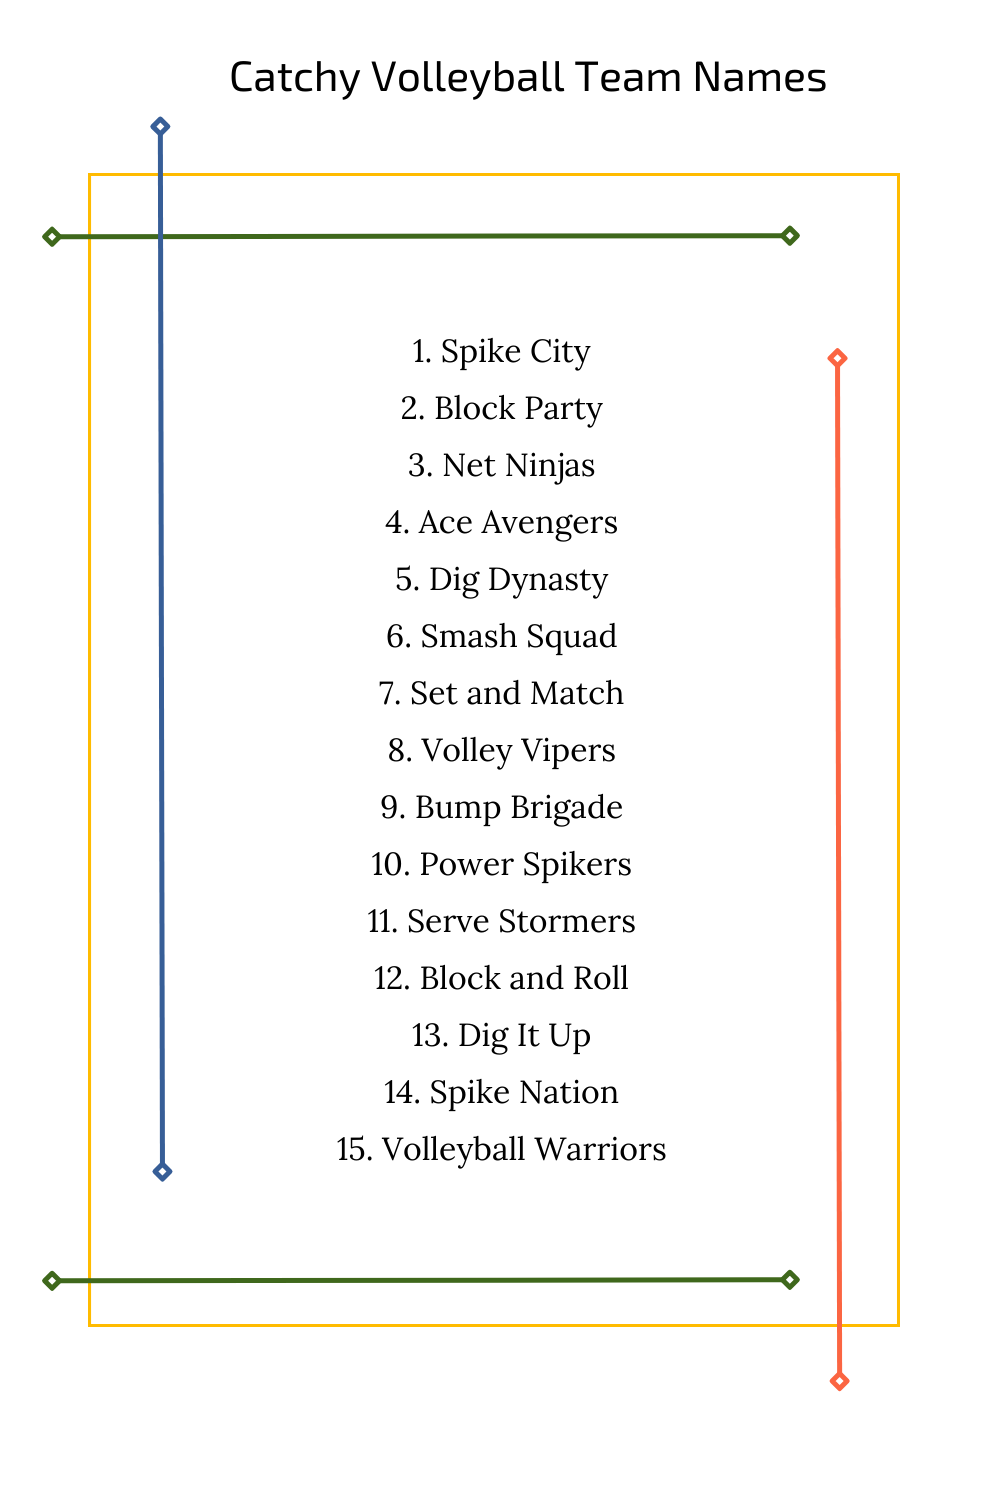 Catchy Volleyball Team Names